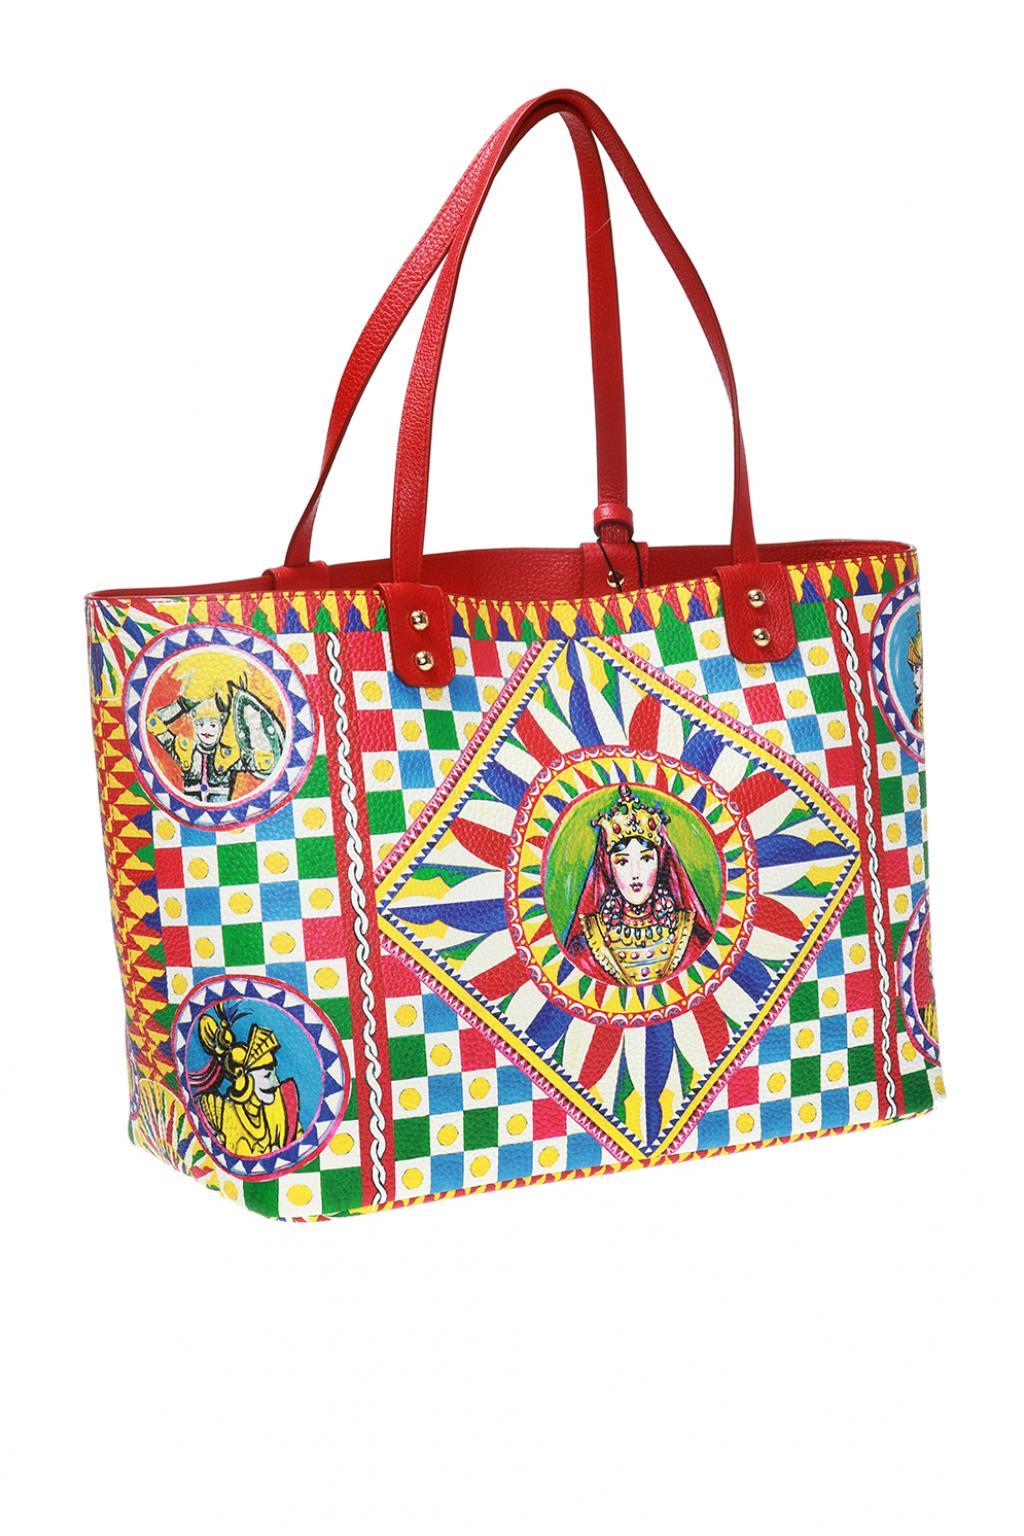 Dolce & Gabbana Beatrice Printed Leather Tote in Red | Lyst